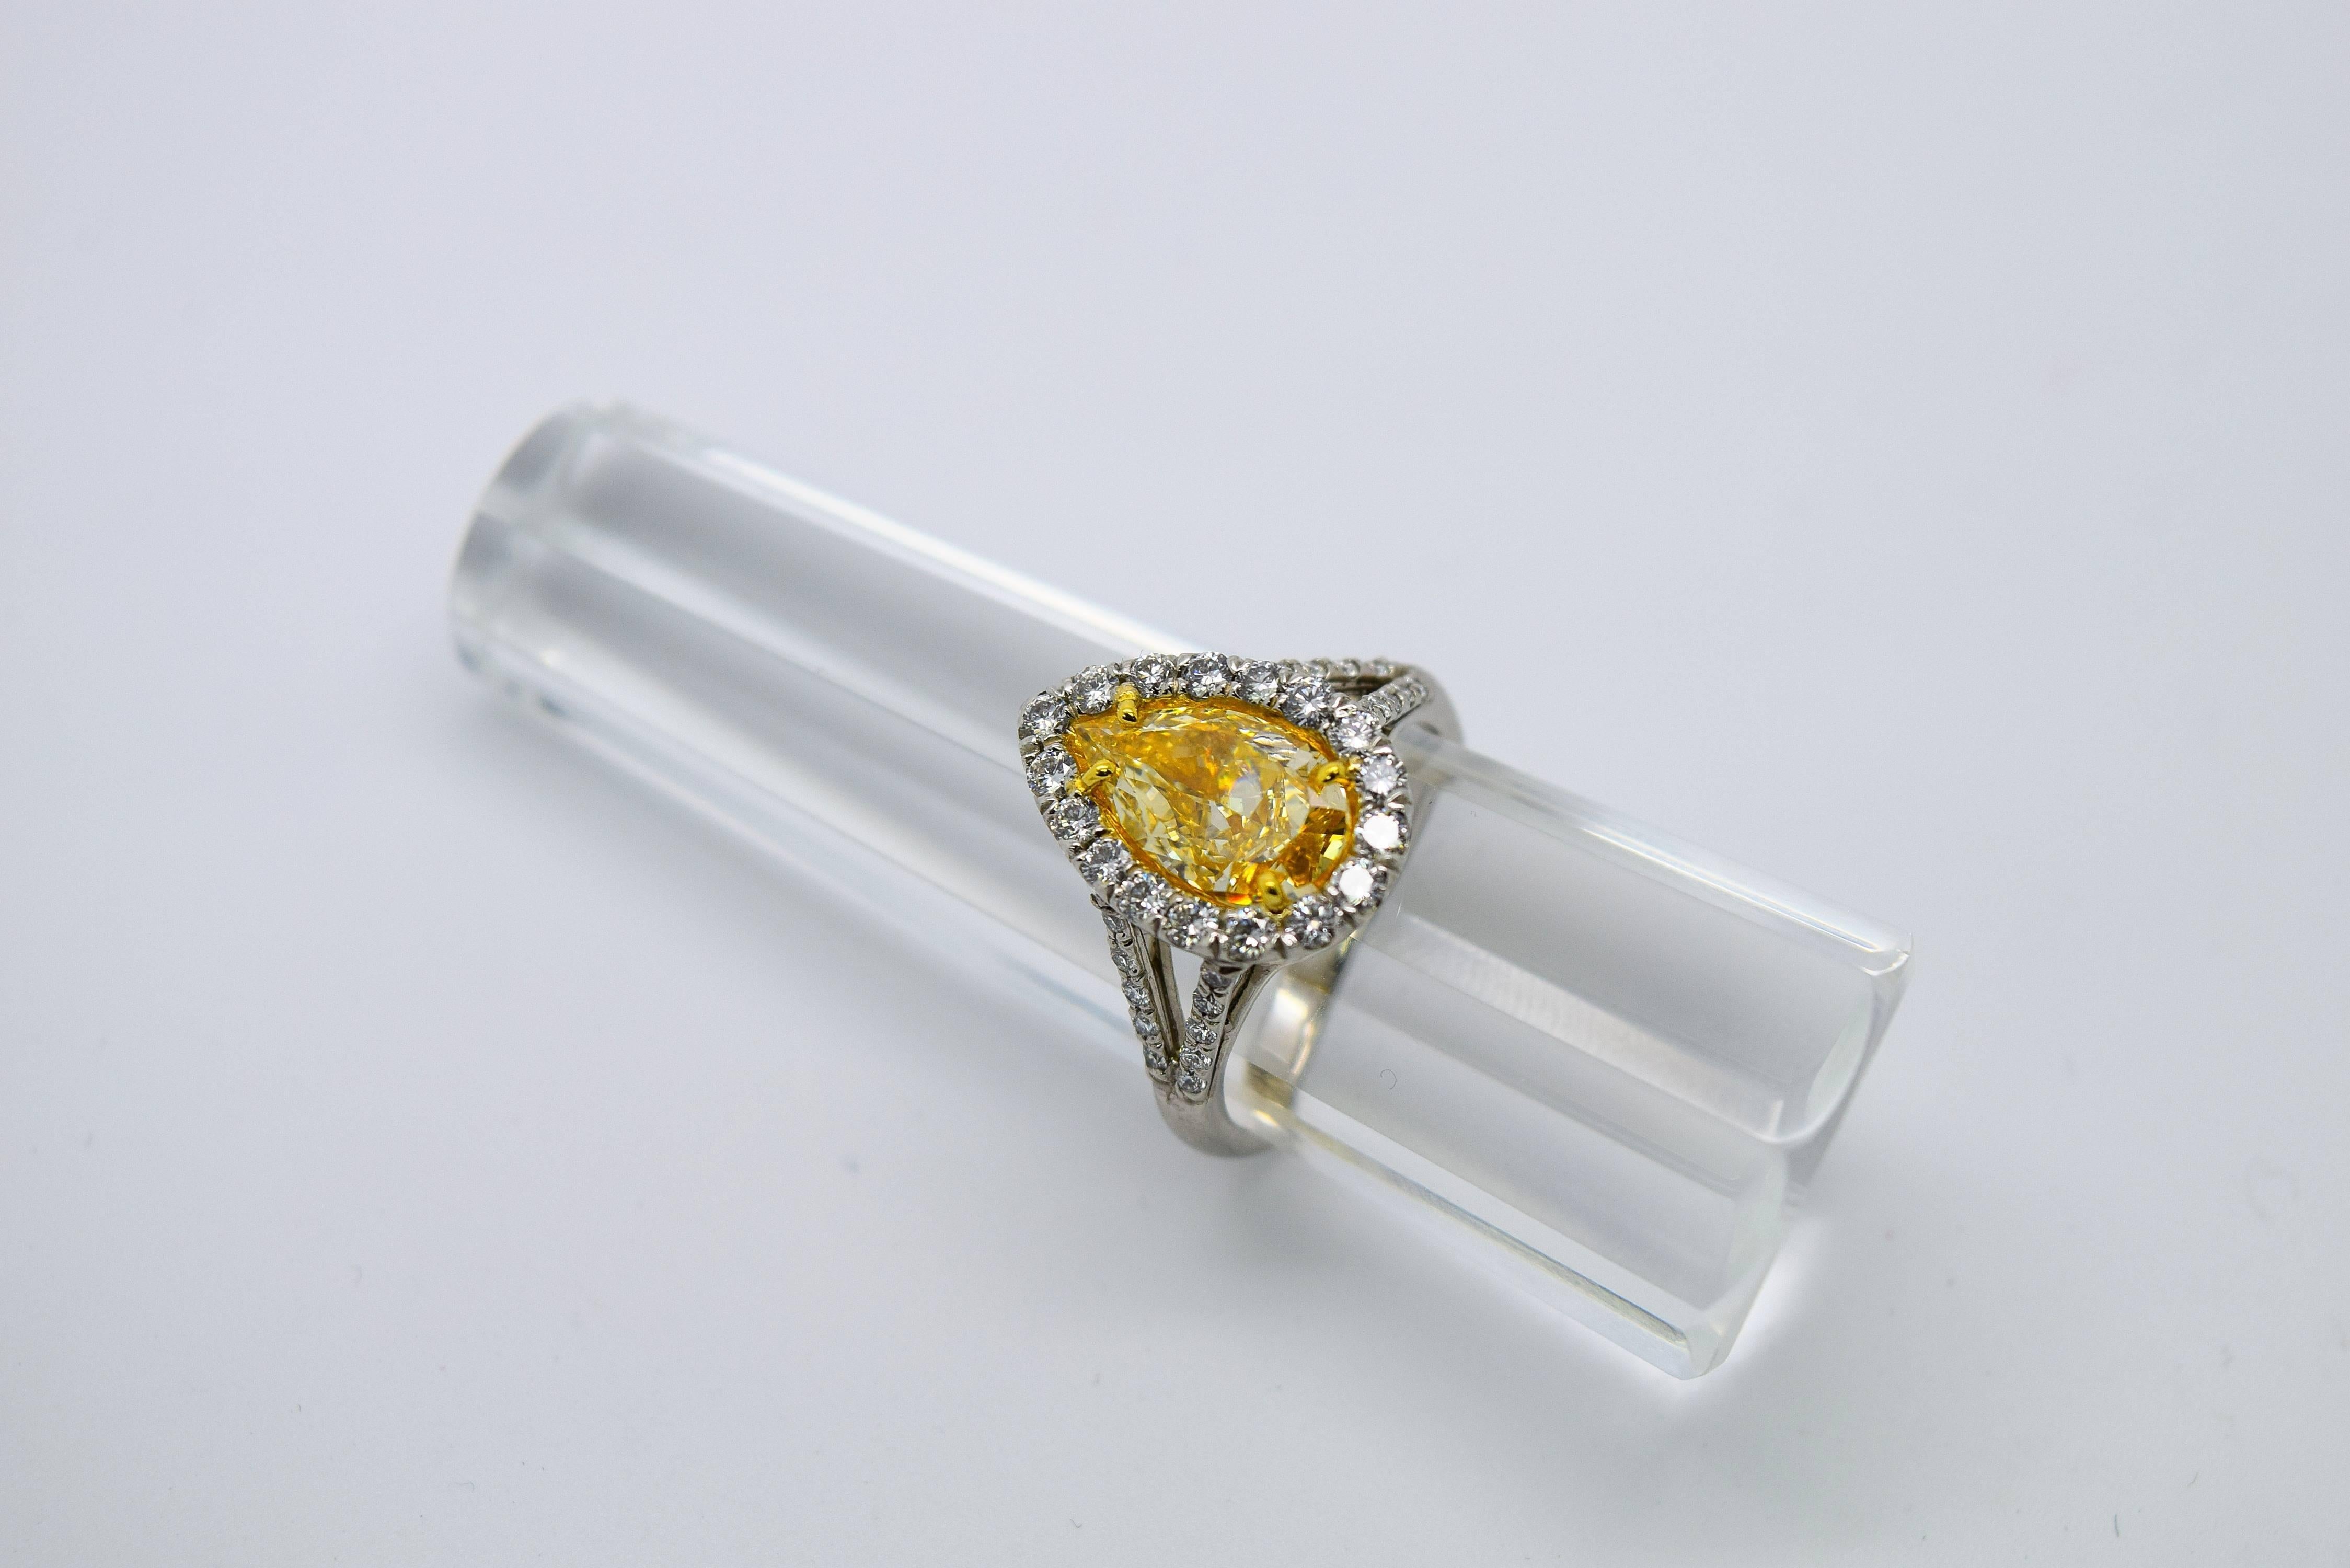 Gorgeous natural yellow pear shape diamond in a platinum and 18k yellow gold ring. 
Weight: 7.38 Grams 
Stones: Yellow and white Diamonds 
Center Diamond: 2.01ct Fancy Intense Yellow Color VS2 Clarity Excellent Cut 
Shape: Round Brilliant Cut